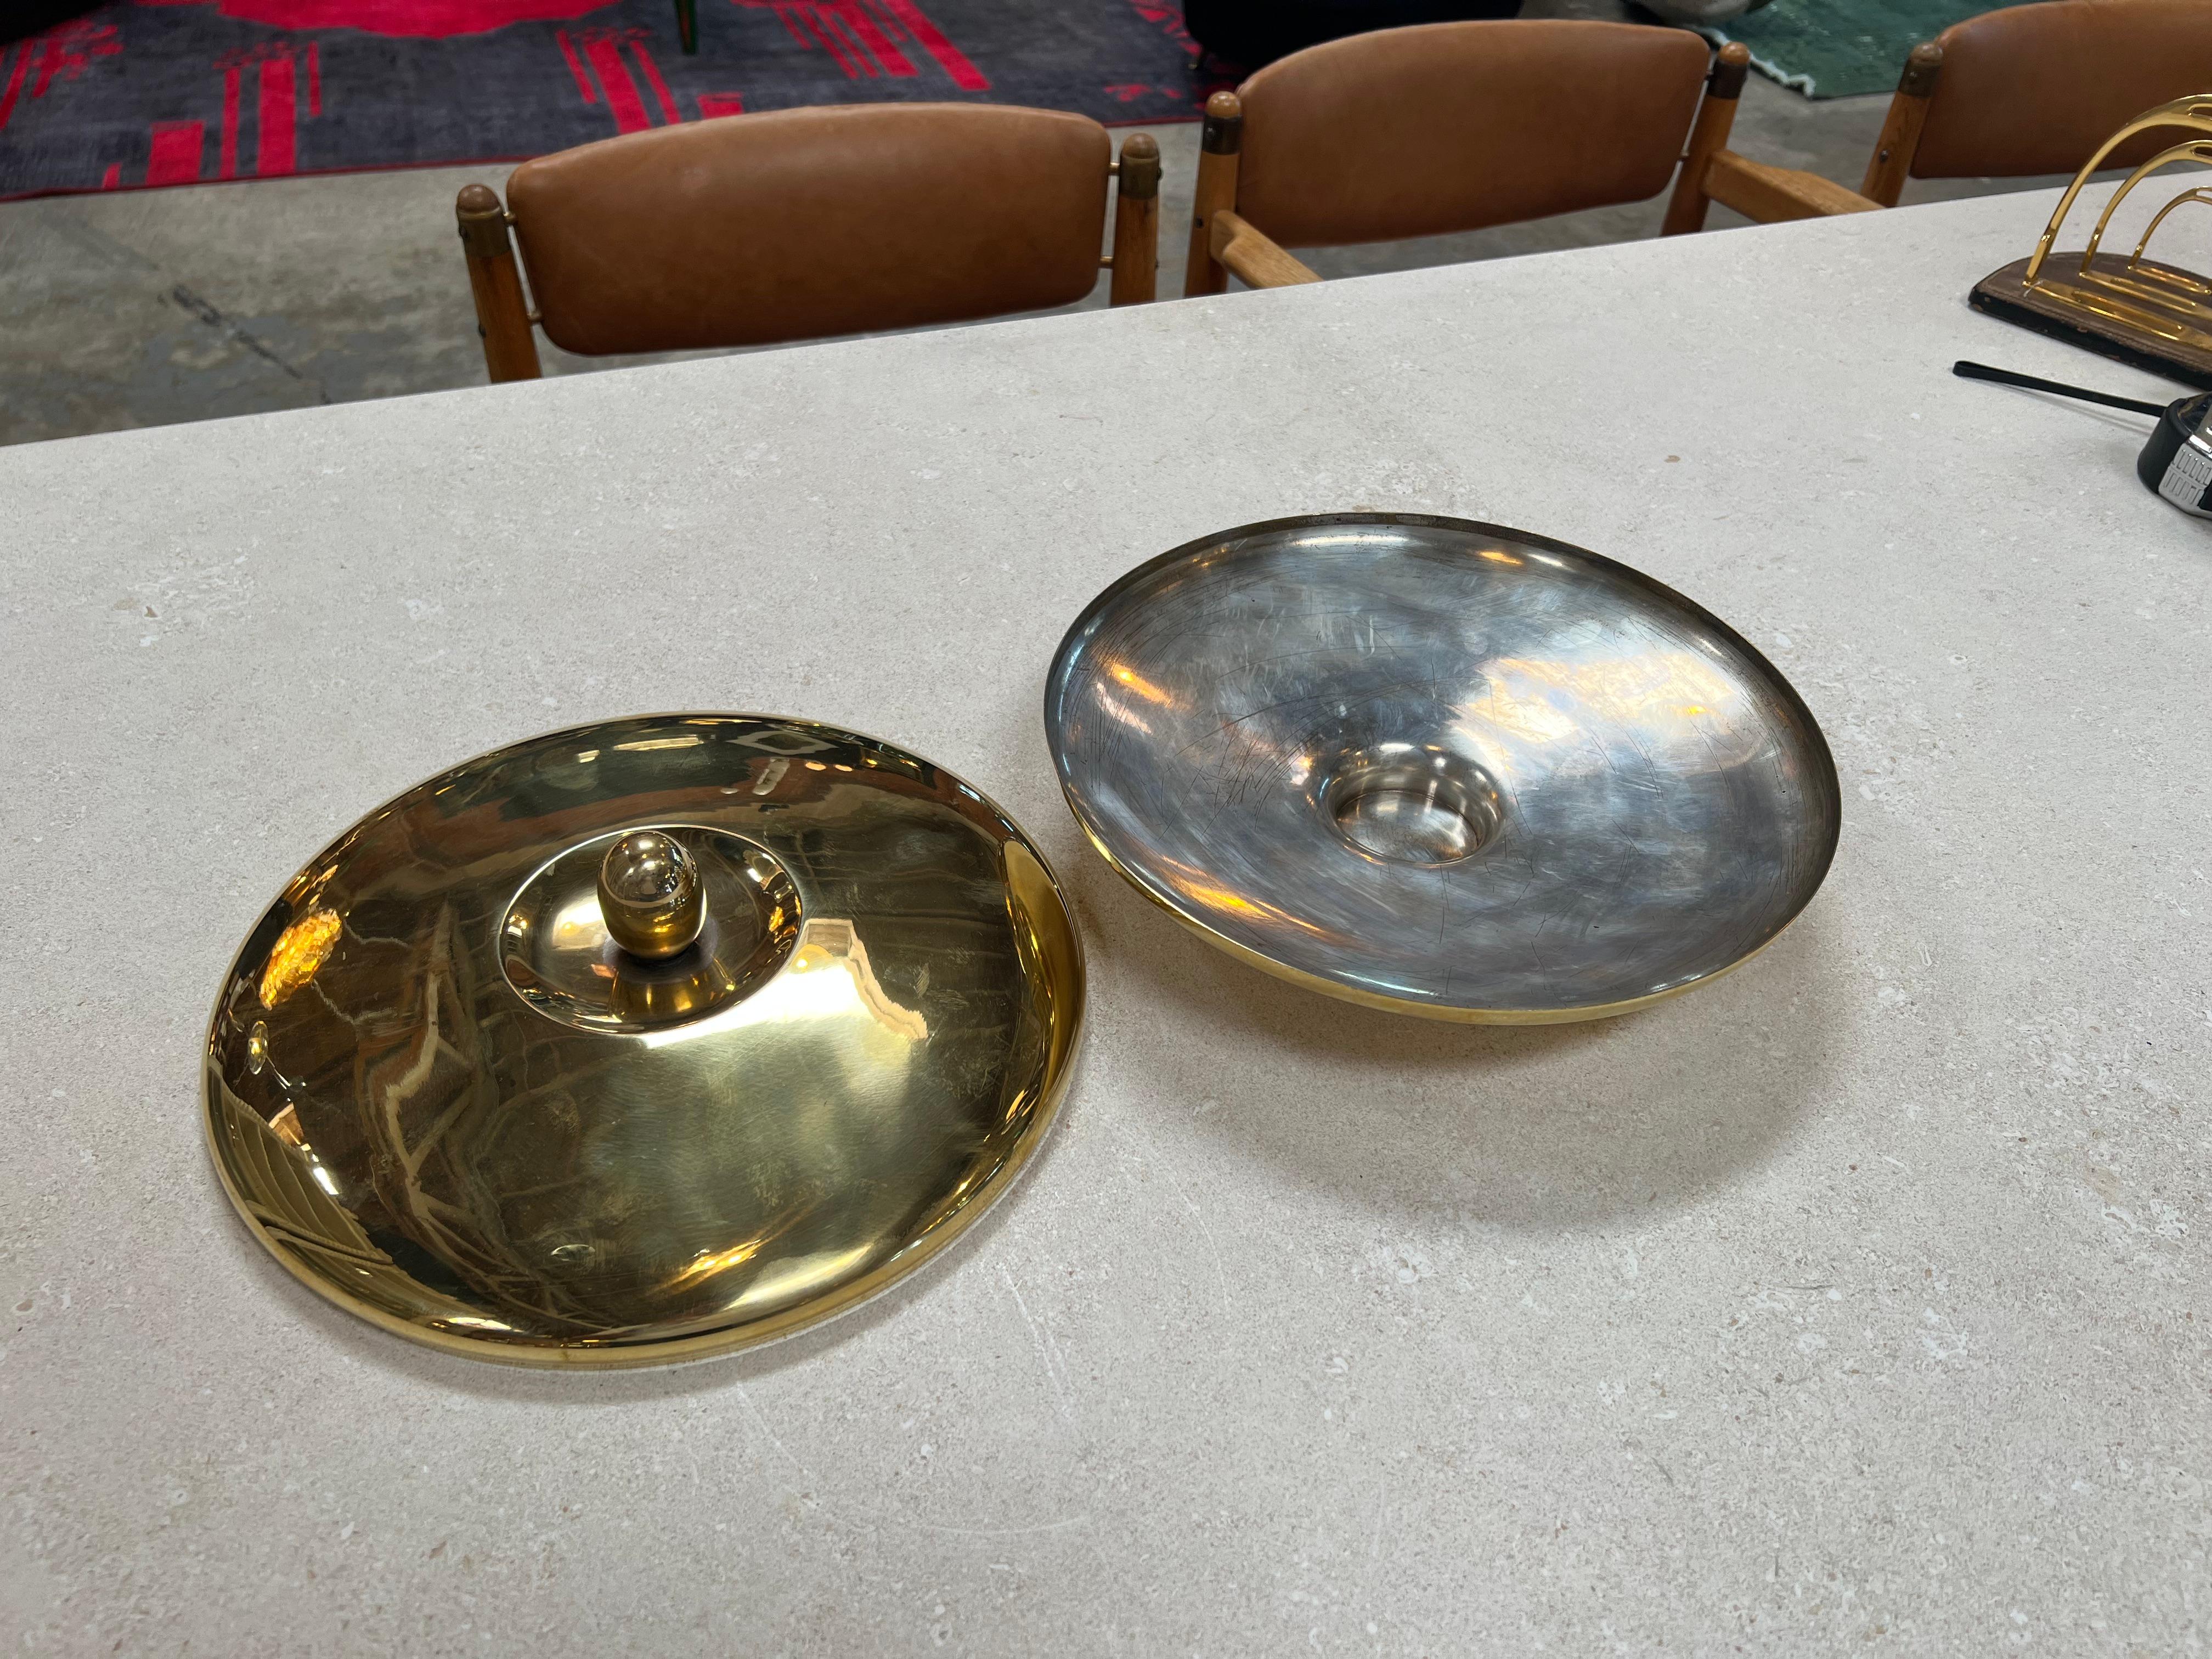 The Vintage Italian Brass Center Bowl from the 1960s is a captivating embodiment of Italian design and craftsmanship. This centerpiece exudes a timeless elegance with its rich brass material and refined construction. Its sleek lines and attention to